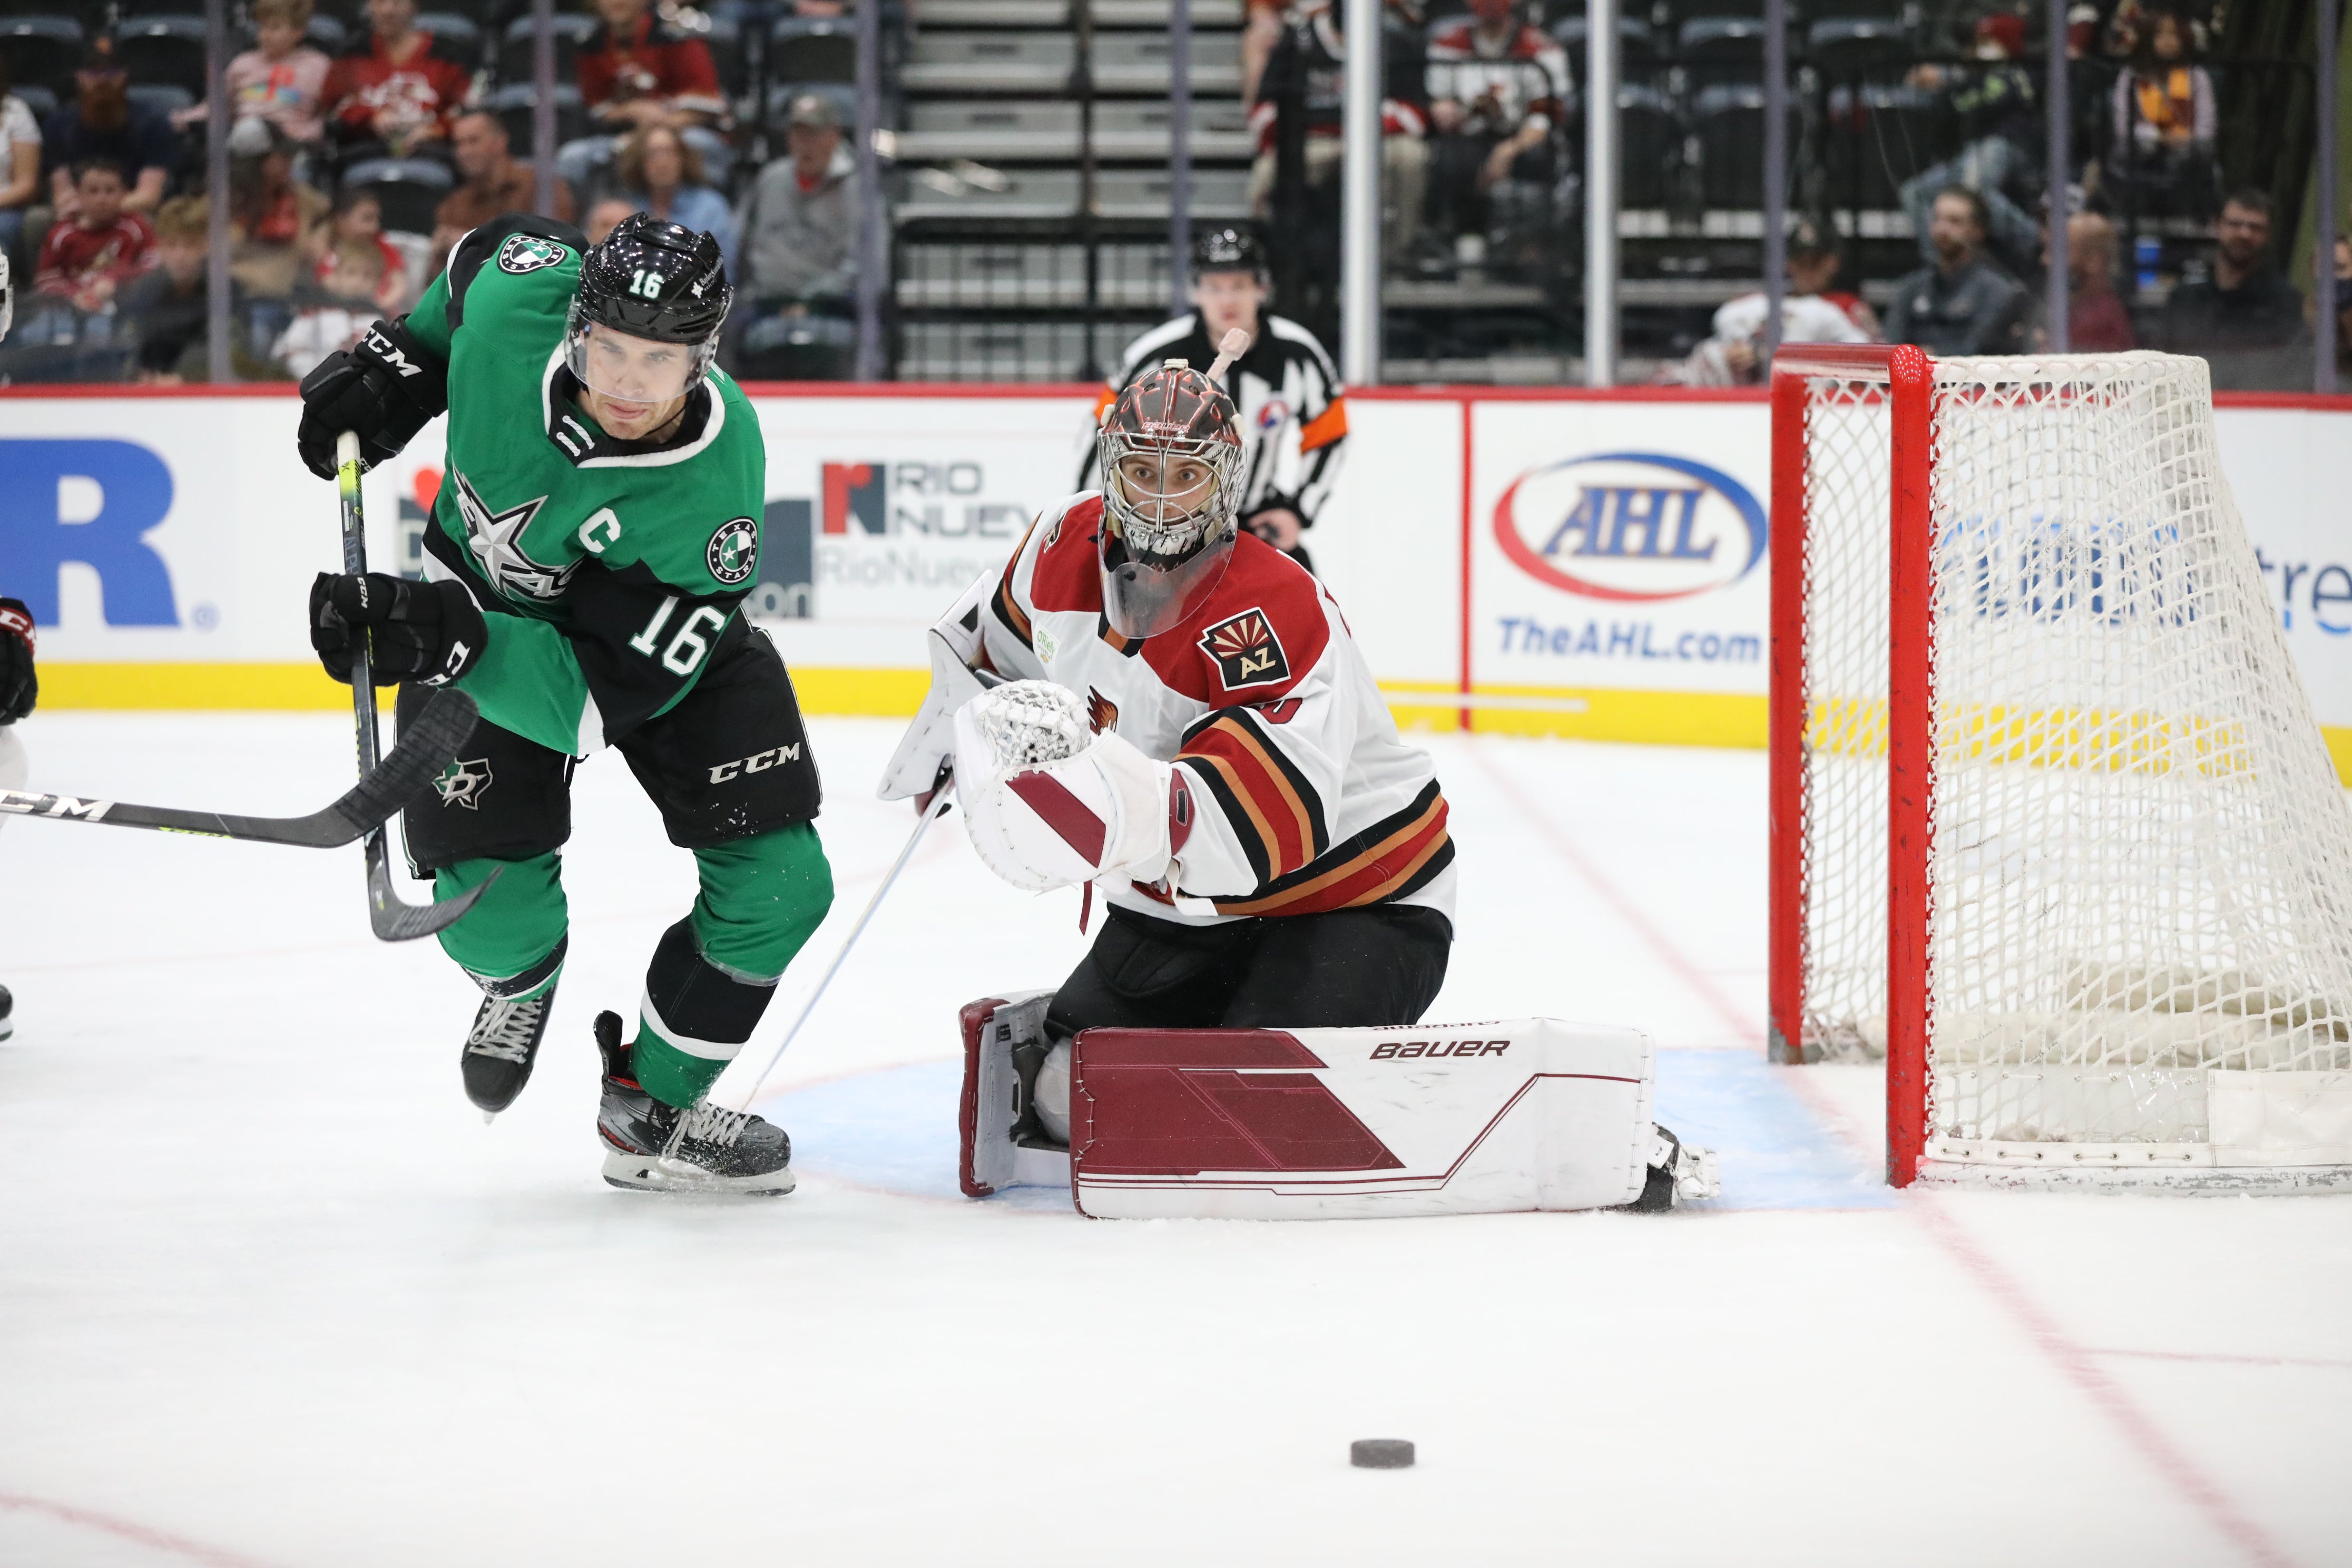 Stars Shutout 4-0 in First Road Game of the Season